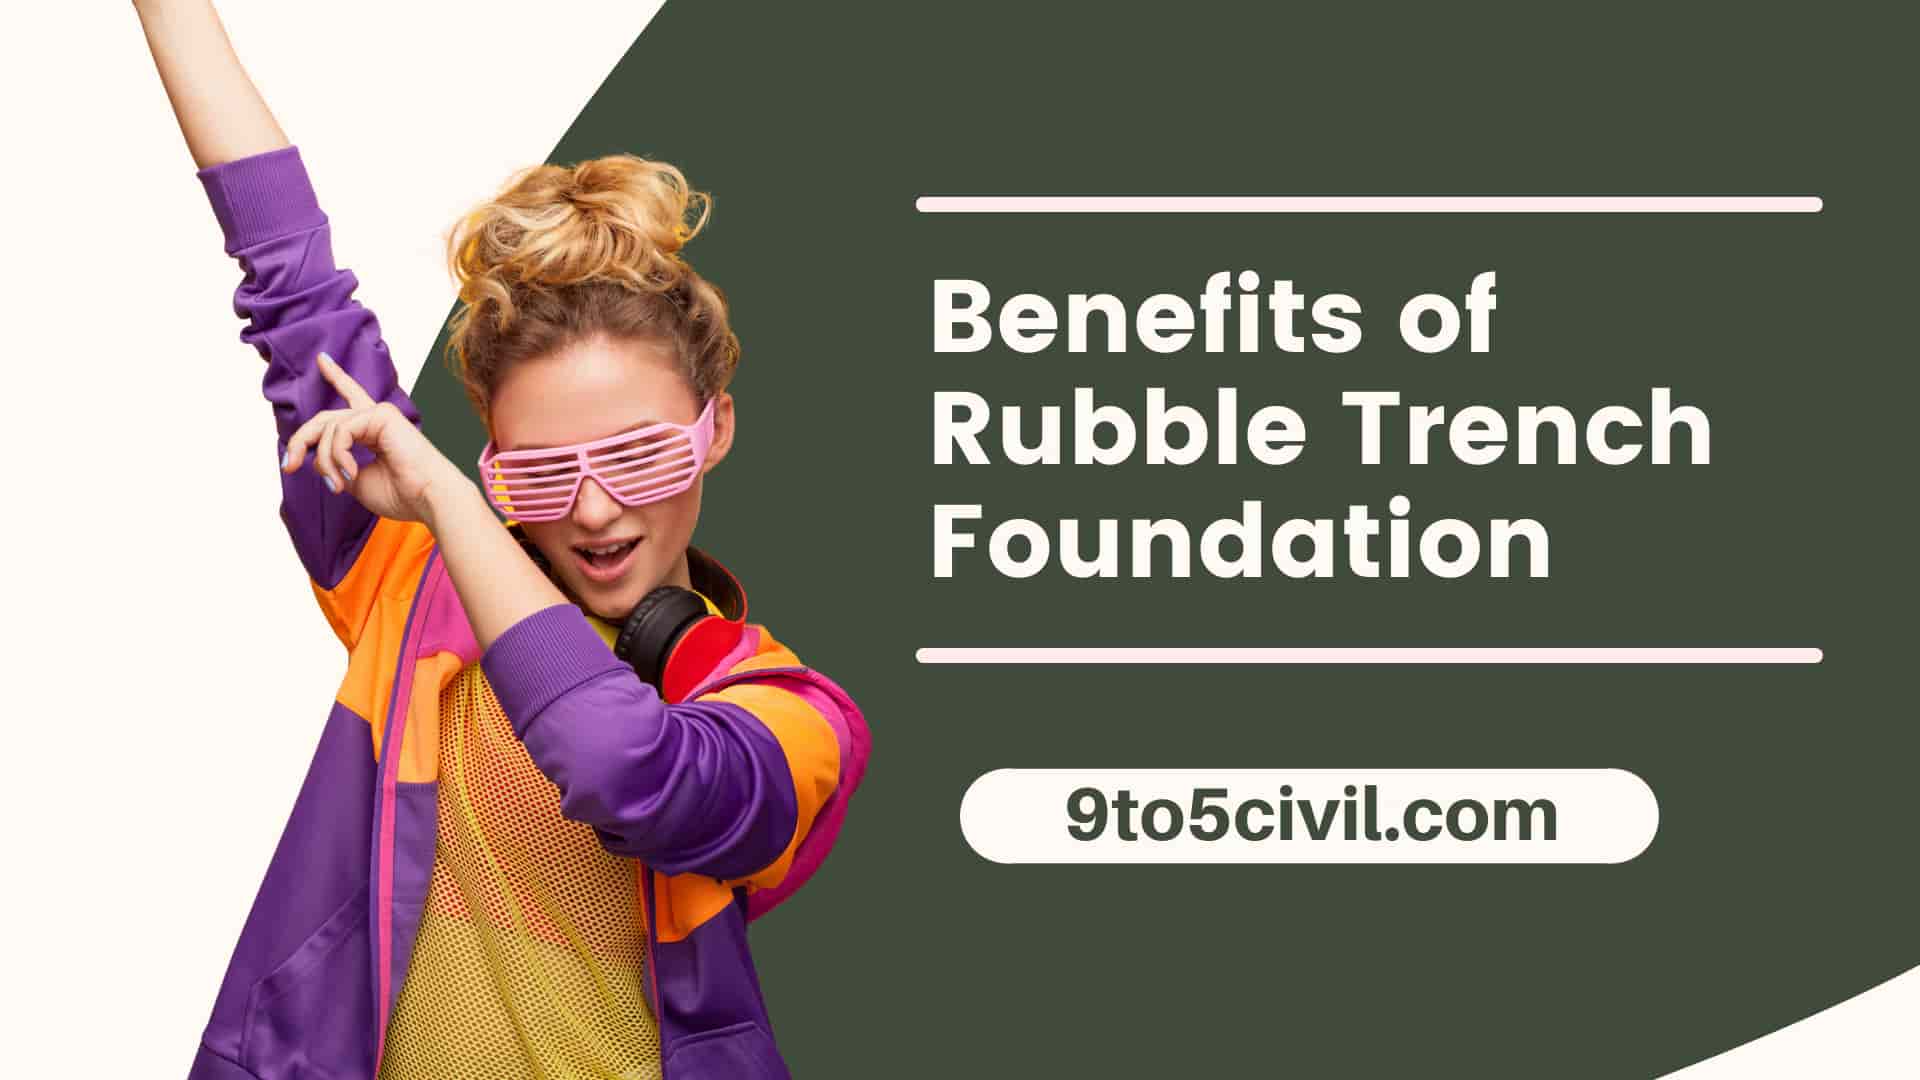 Benefits of Rubble Trench Foundation